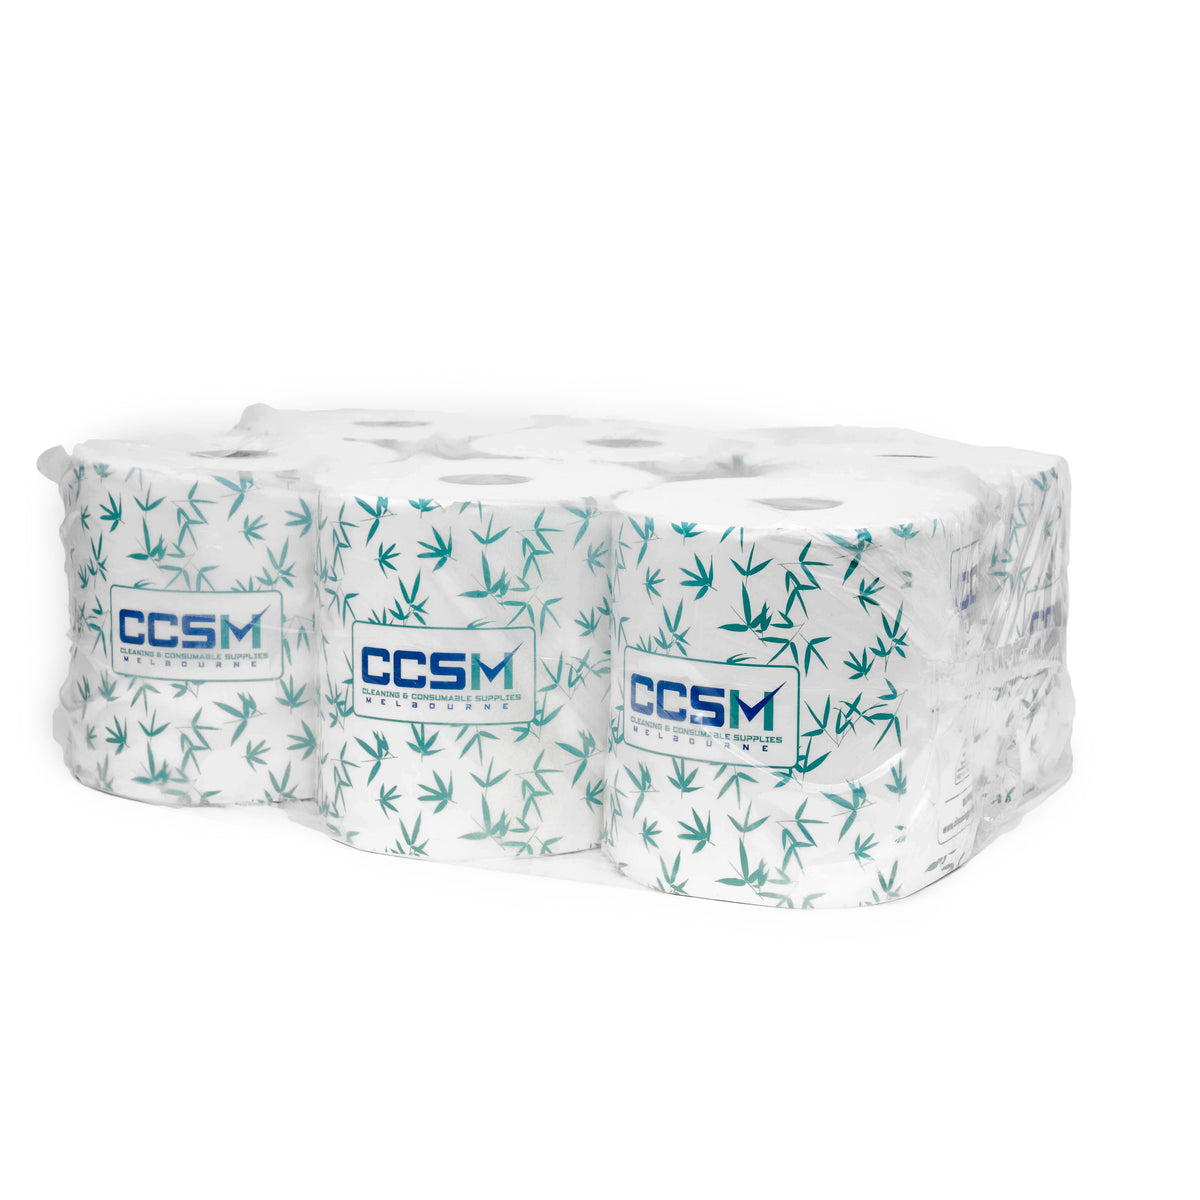 CCSM CENTREFEED HAND TOWEL ROLL